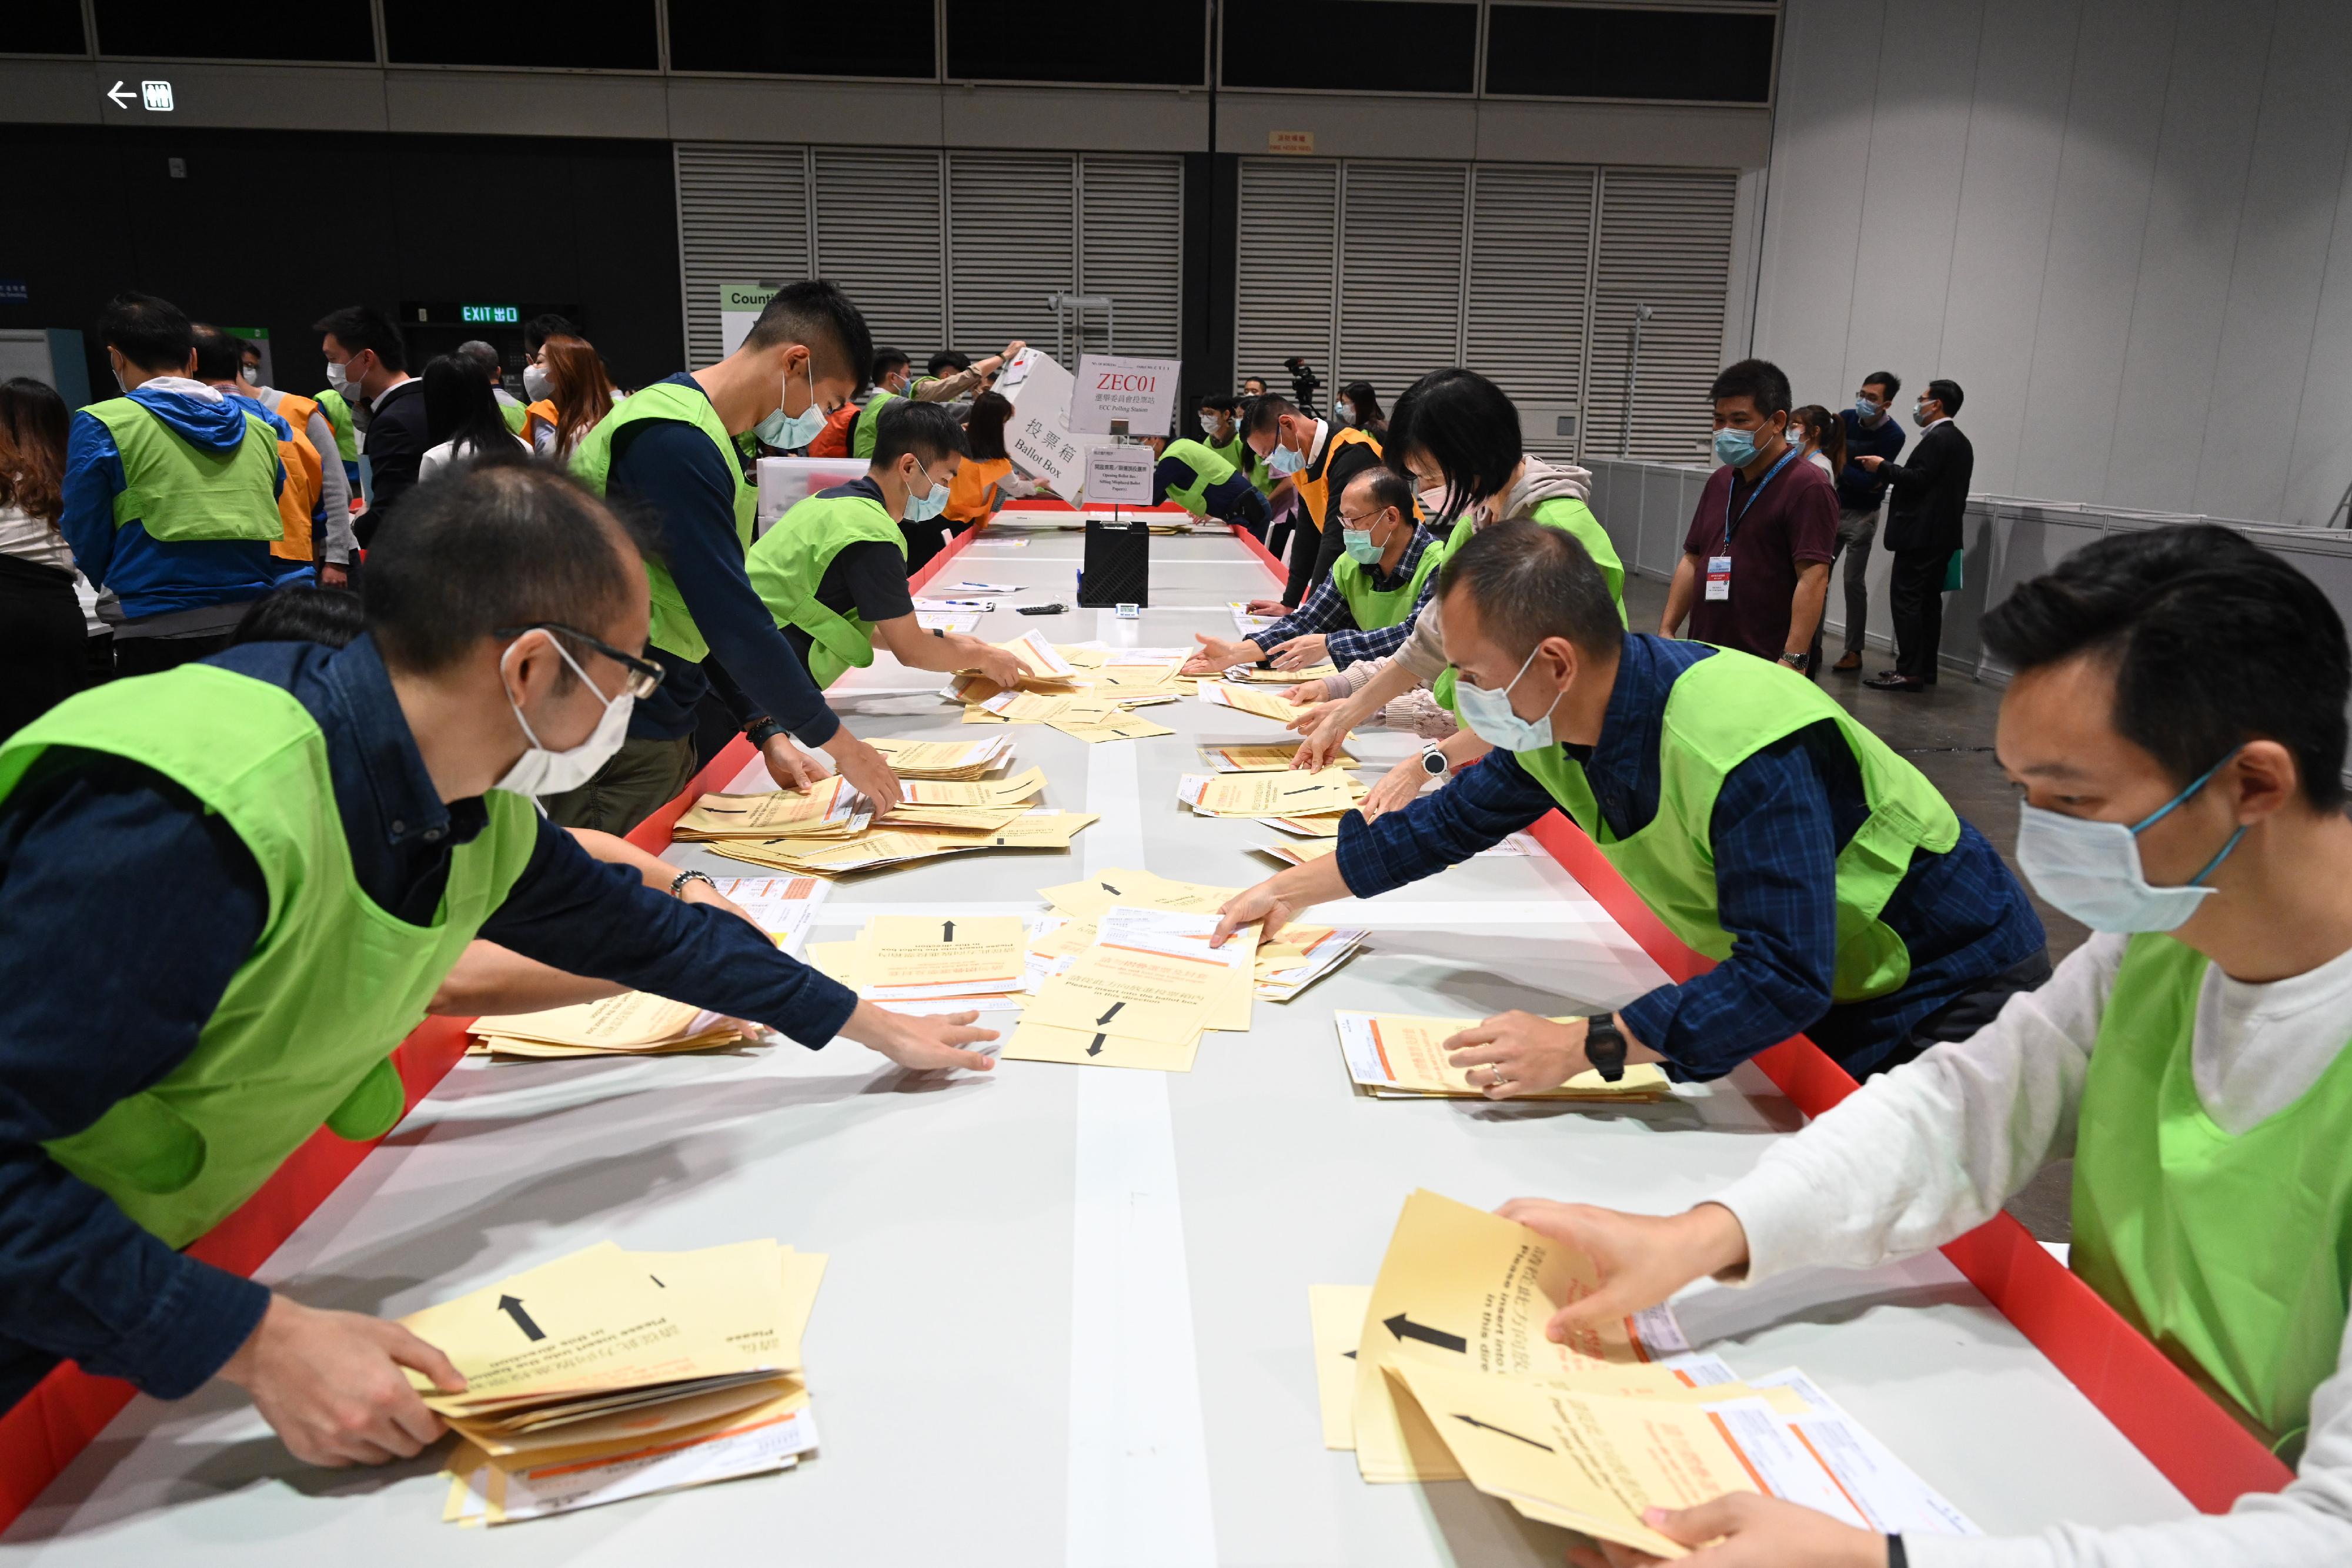 The Chairman of the Electoral Affairs Commission, Mr Justice Barnabas Fung Wah, visited the central counting station of the 2021 Legislative Council General Election at the Hong Kong Convention and Exhibition Centre and inspected the training sessions with practical sessions and simulated activities for counting staff. Photo shows staff in a simulation of sifting misplaced geographical constituency and functional constituency ballot papers.